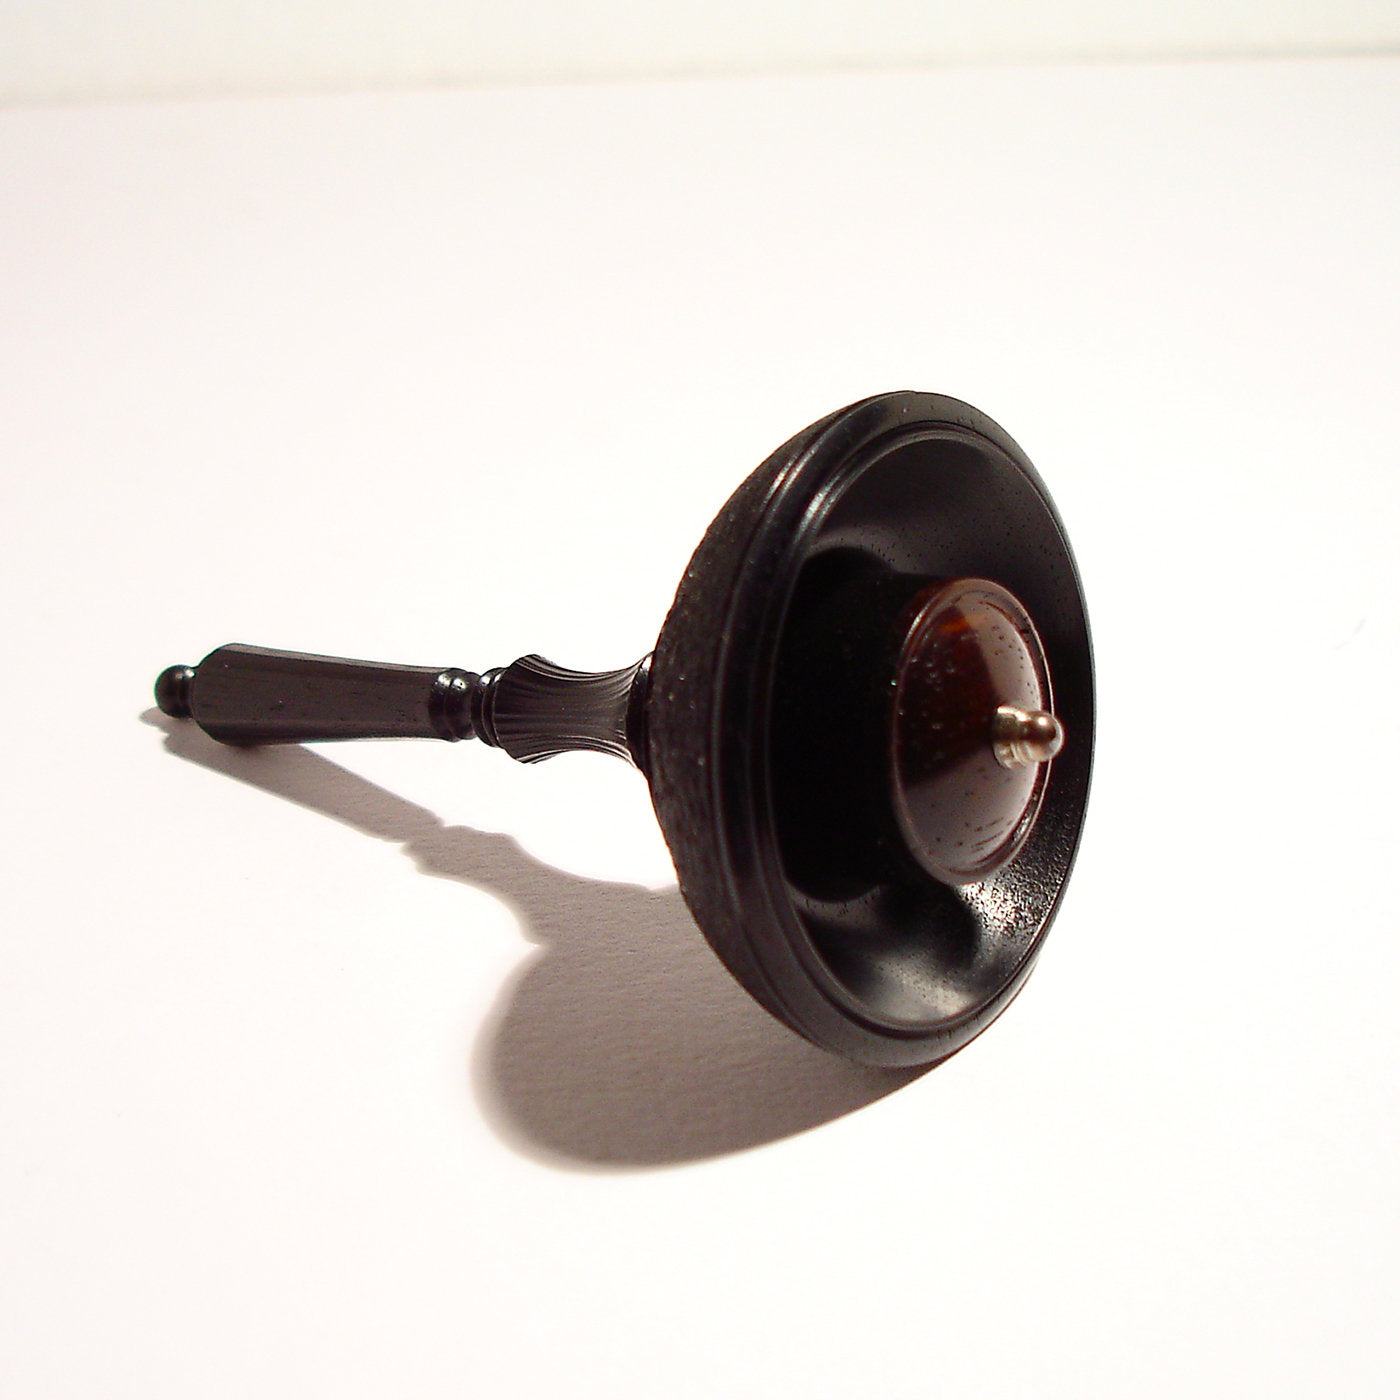 DarkStyle Spinning Top in Ebony and Rio Rosewood - Alternative view 2